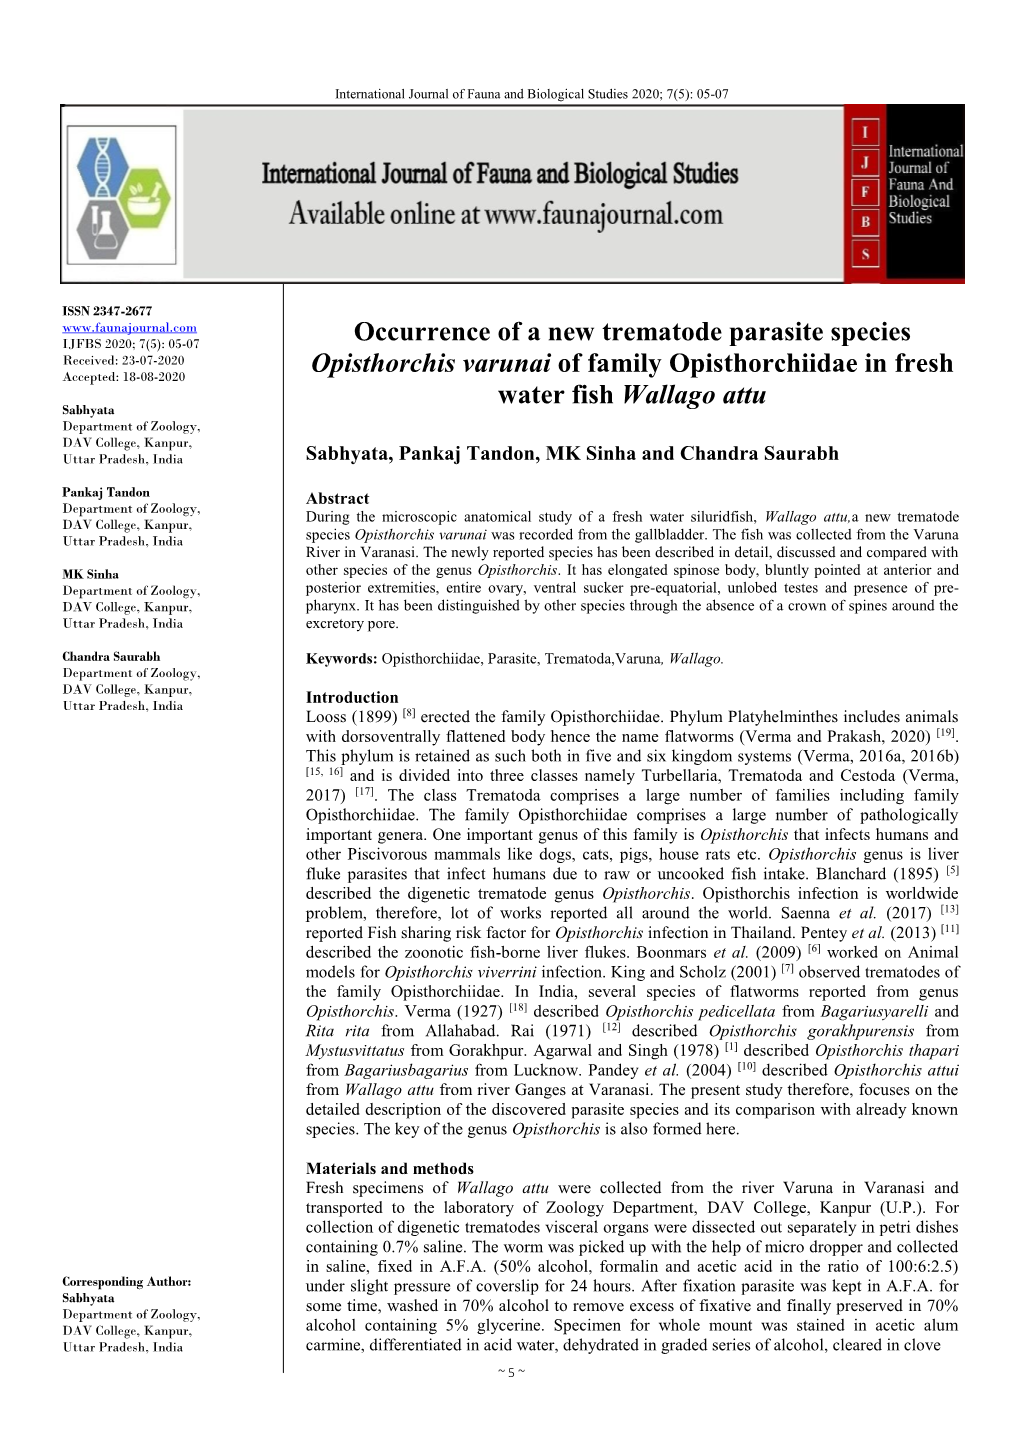 Occurrence of a New Trematode Parasite Species Opisthorchis